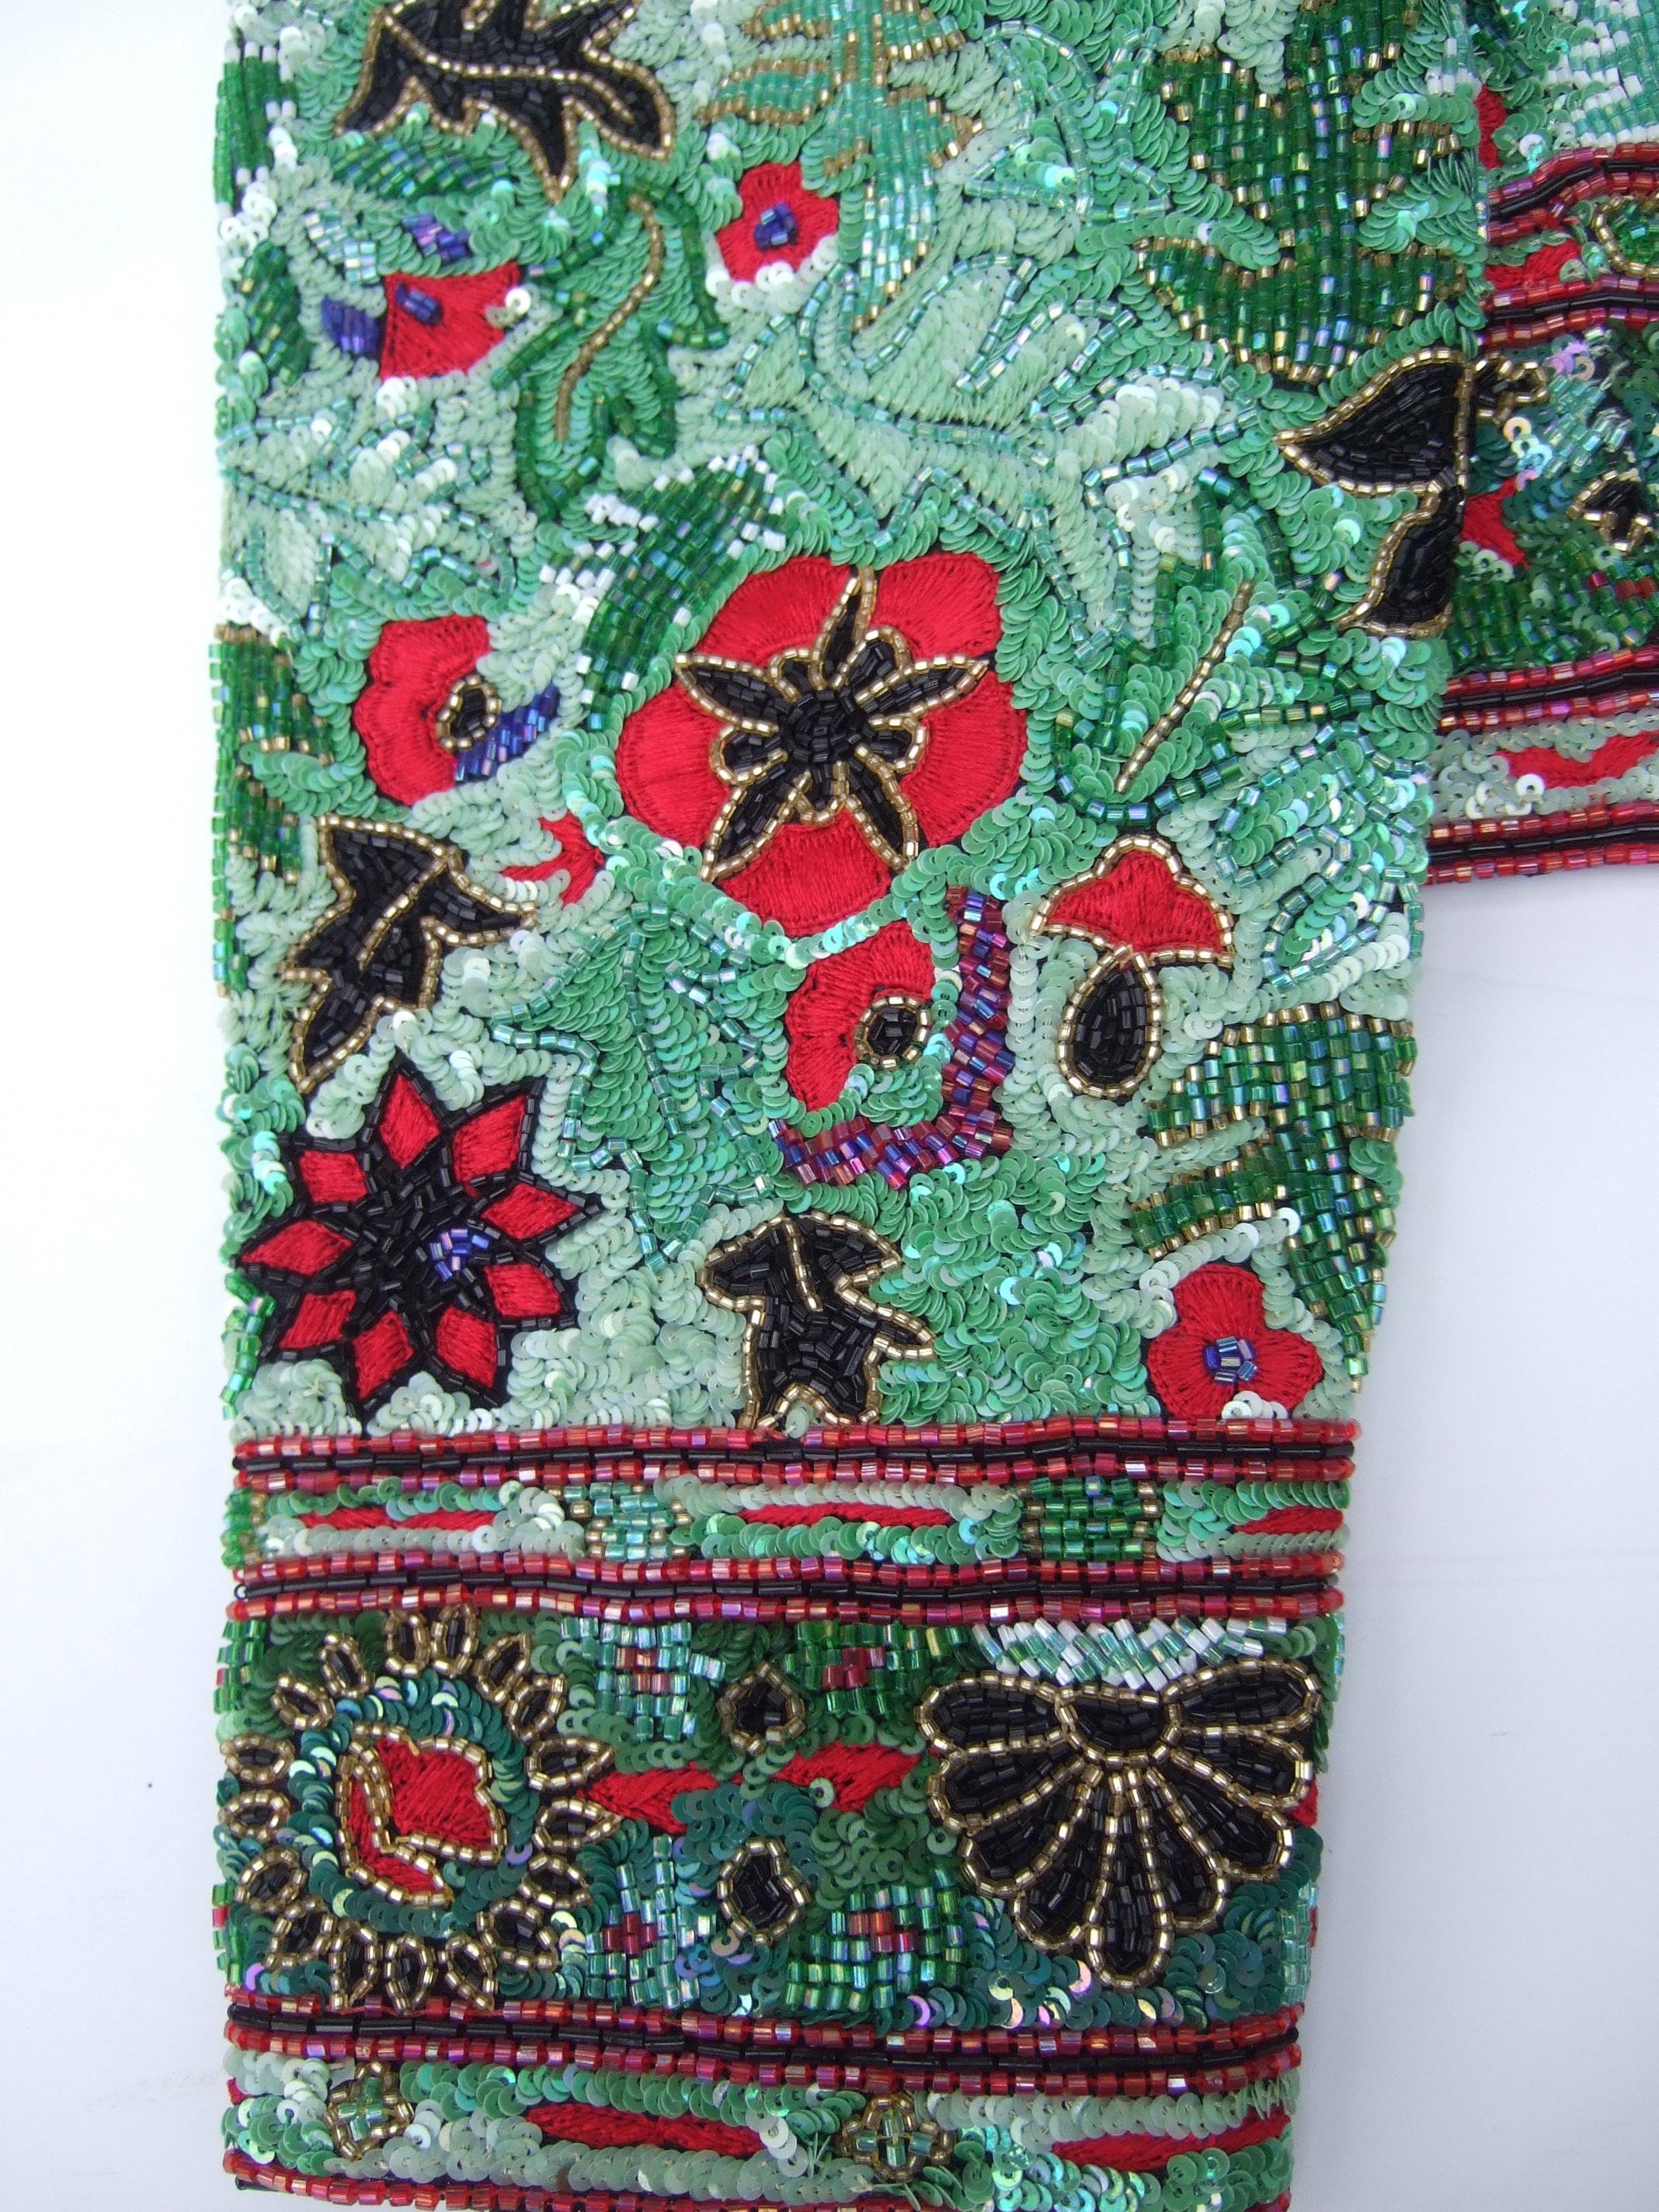 Exquisite Elaborate Glass Floral Beaded Embroidered Bolero Jacket c 1980s For Sale 11